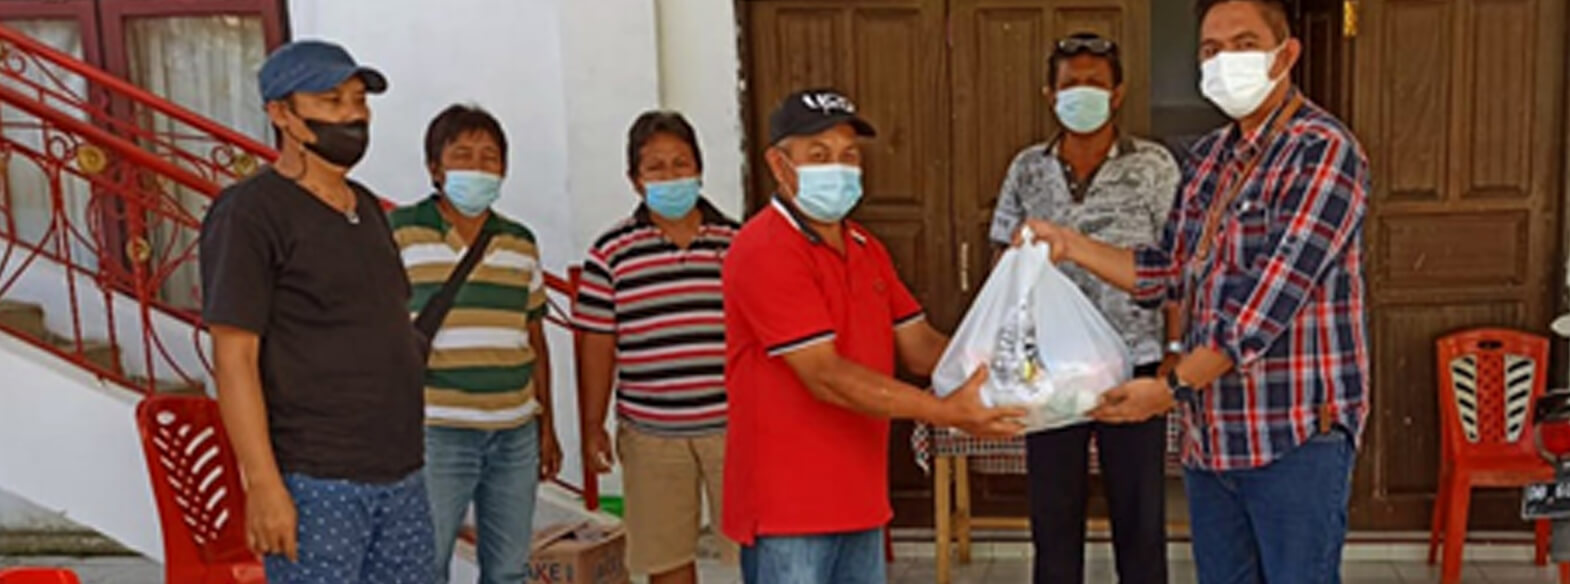 Basic Needs Donation for Communities Impacted by Covid-19 Pandemic